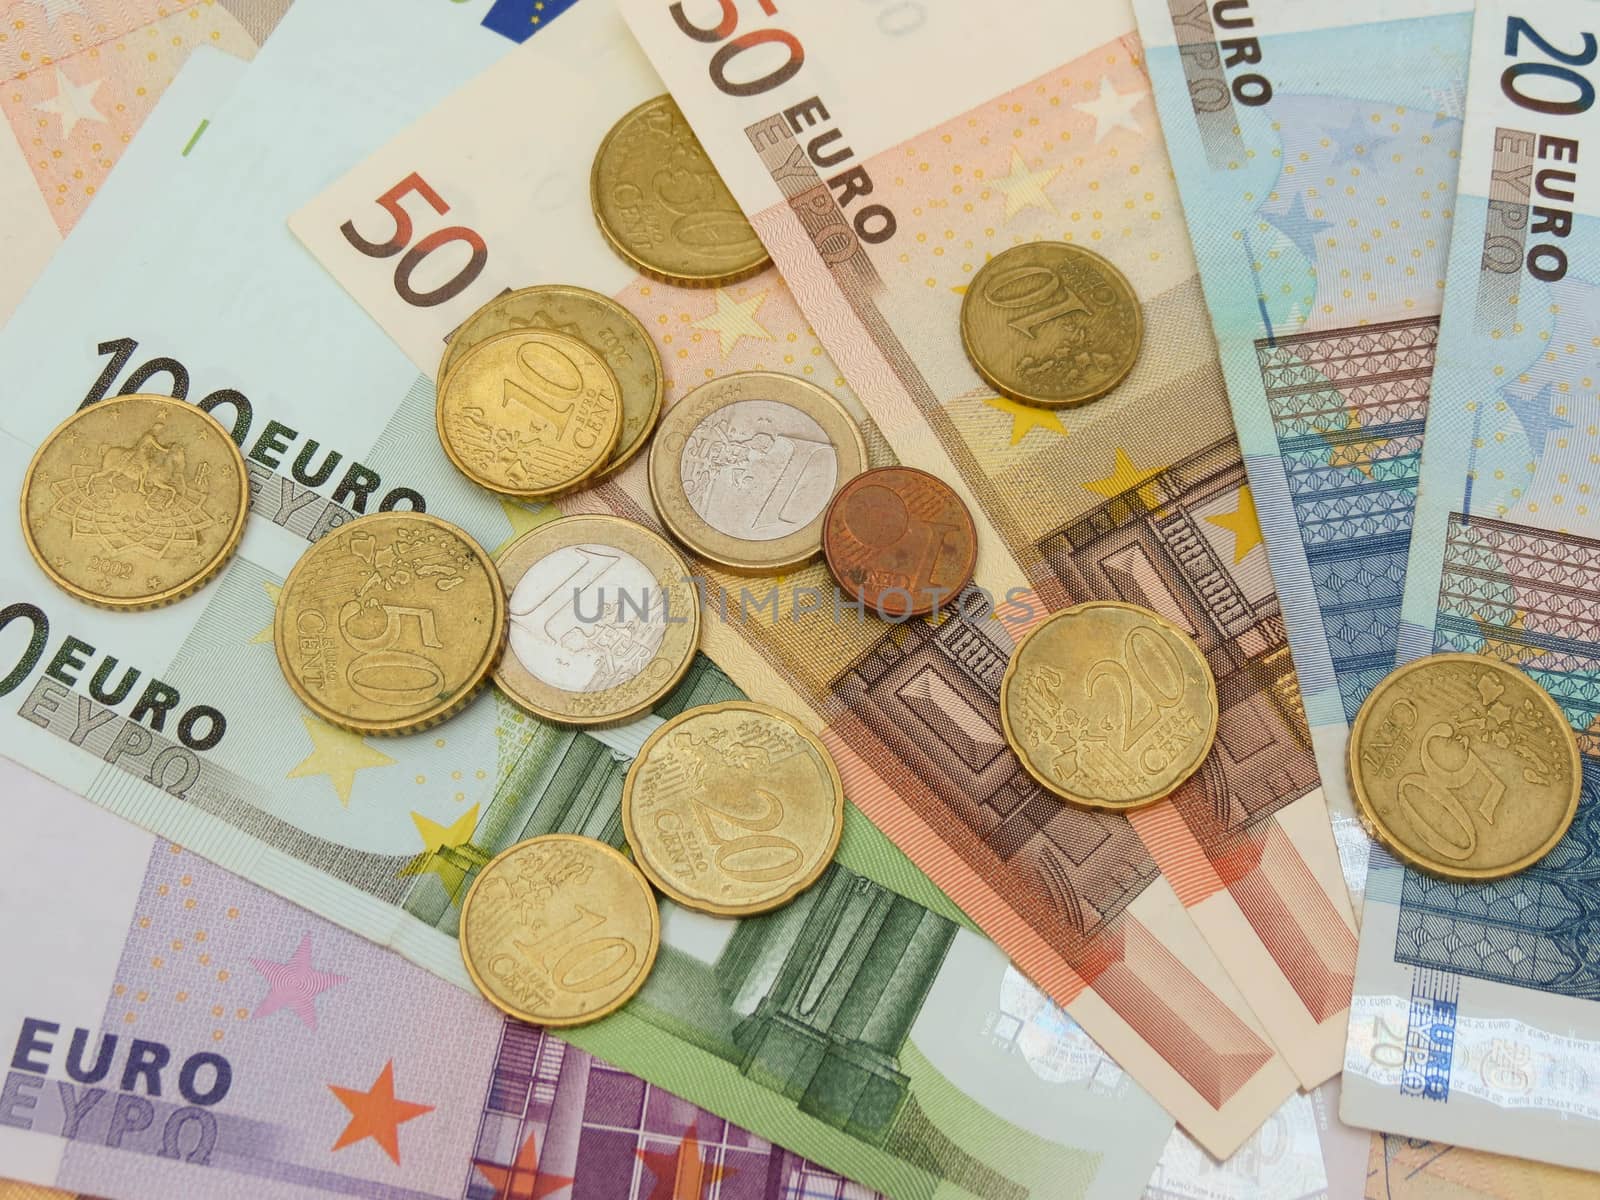 Euro (EUR) banknotes and coins - legal tender of the European Union